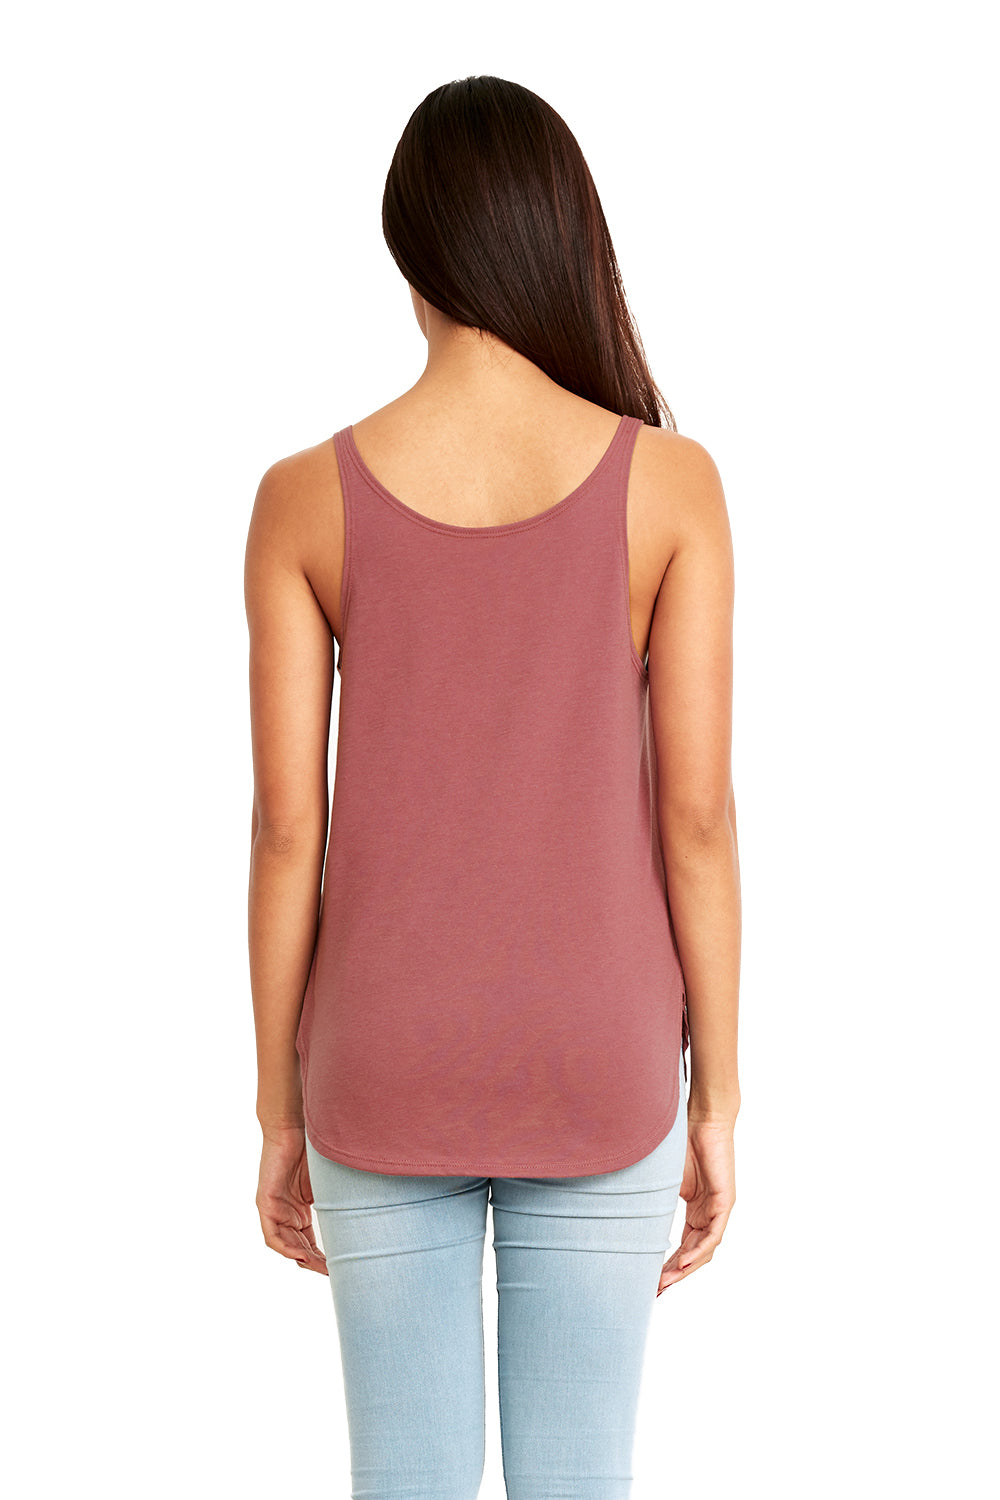 Next Level 5033 Womens Festival Tank Top Paprika Red Back